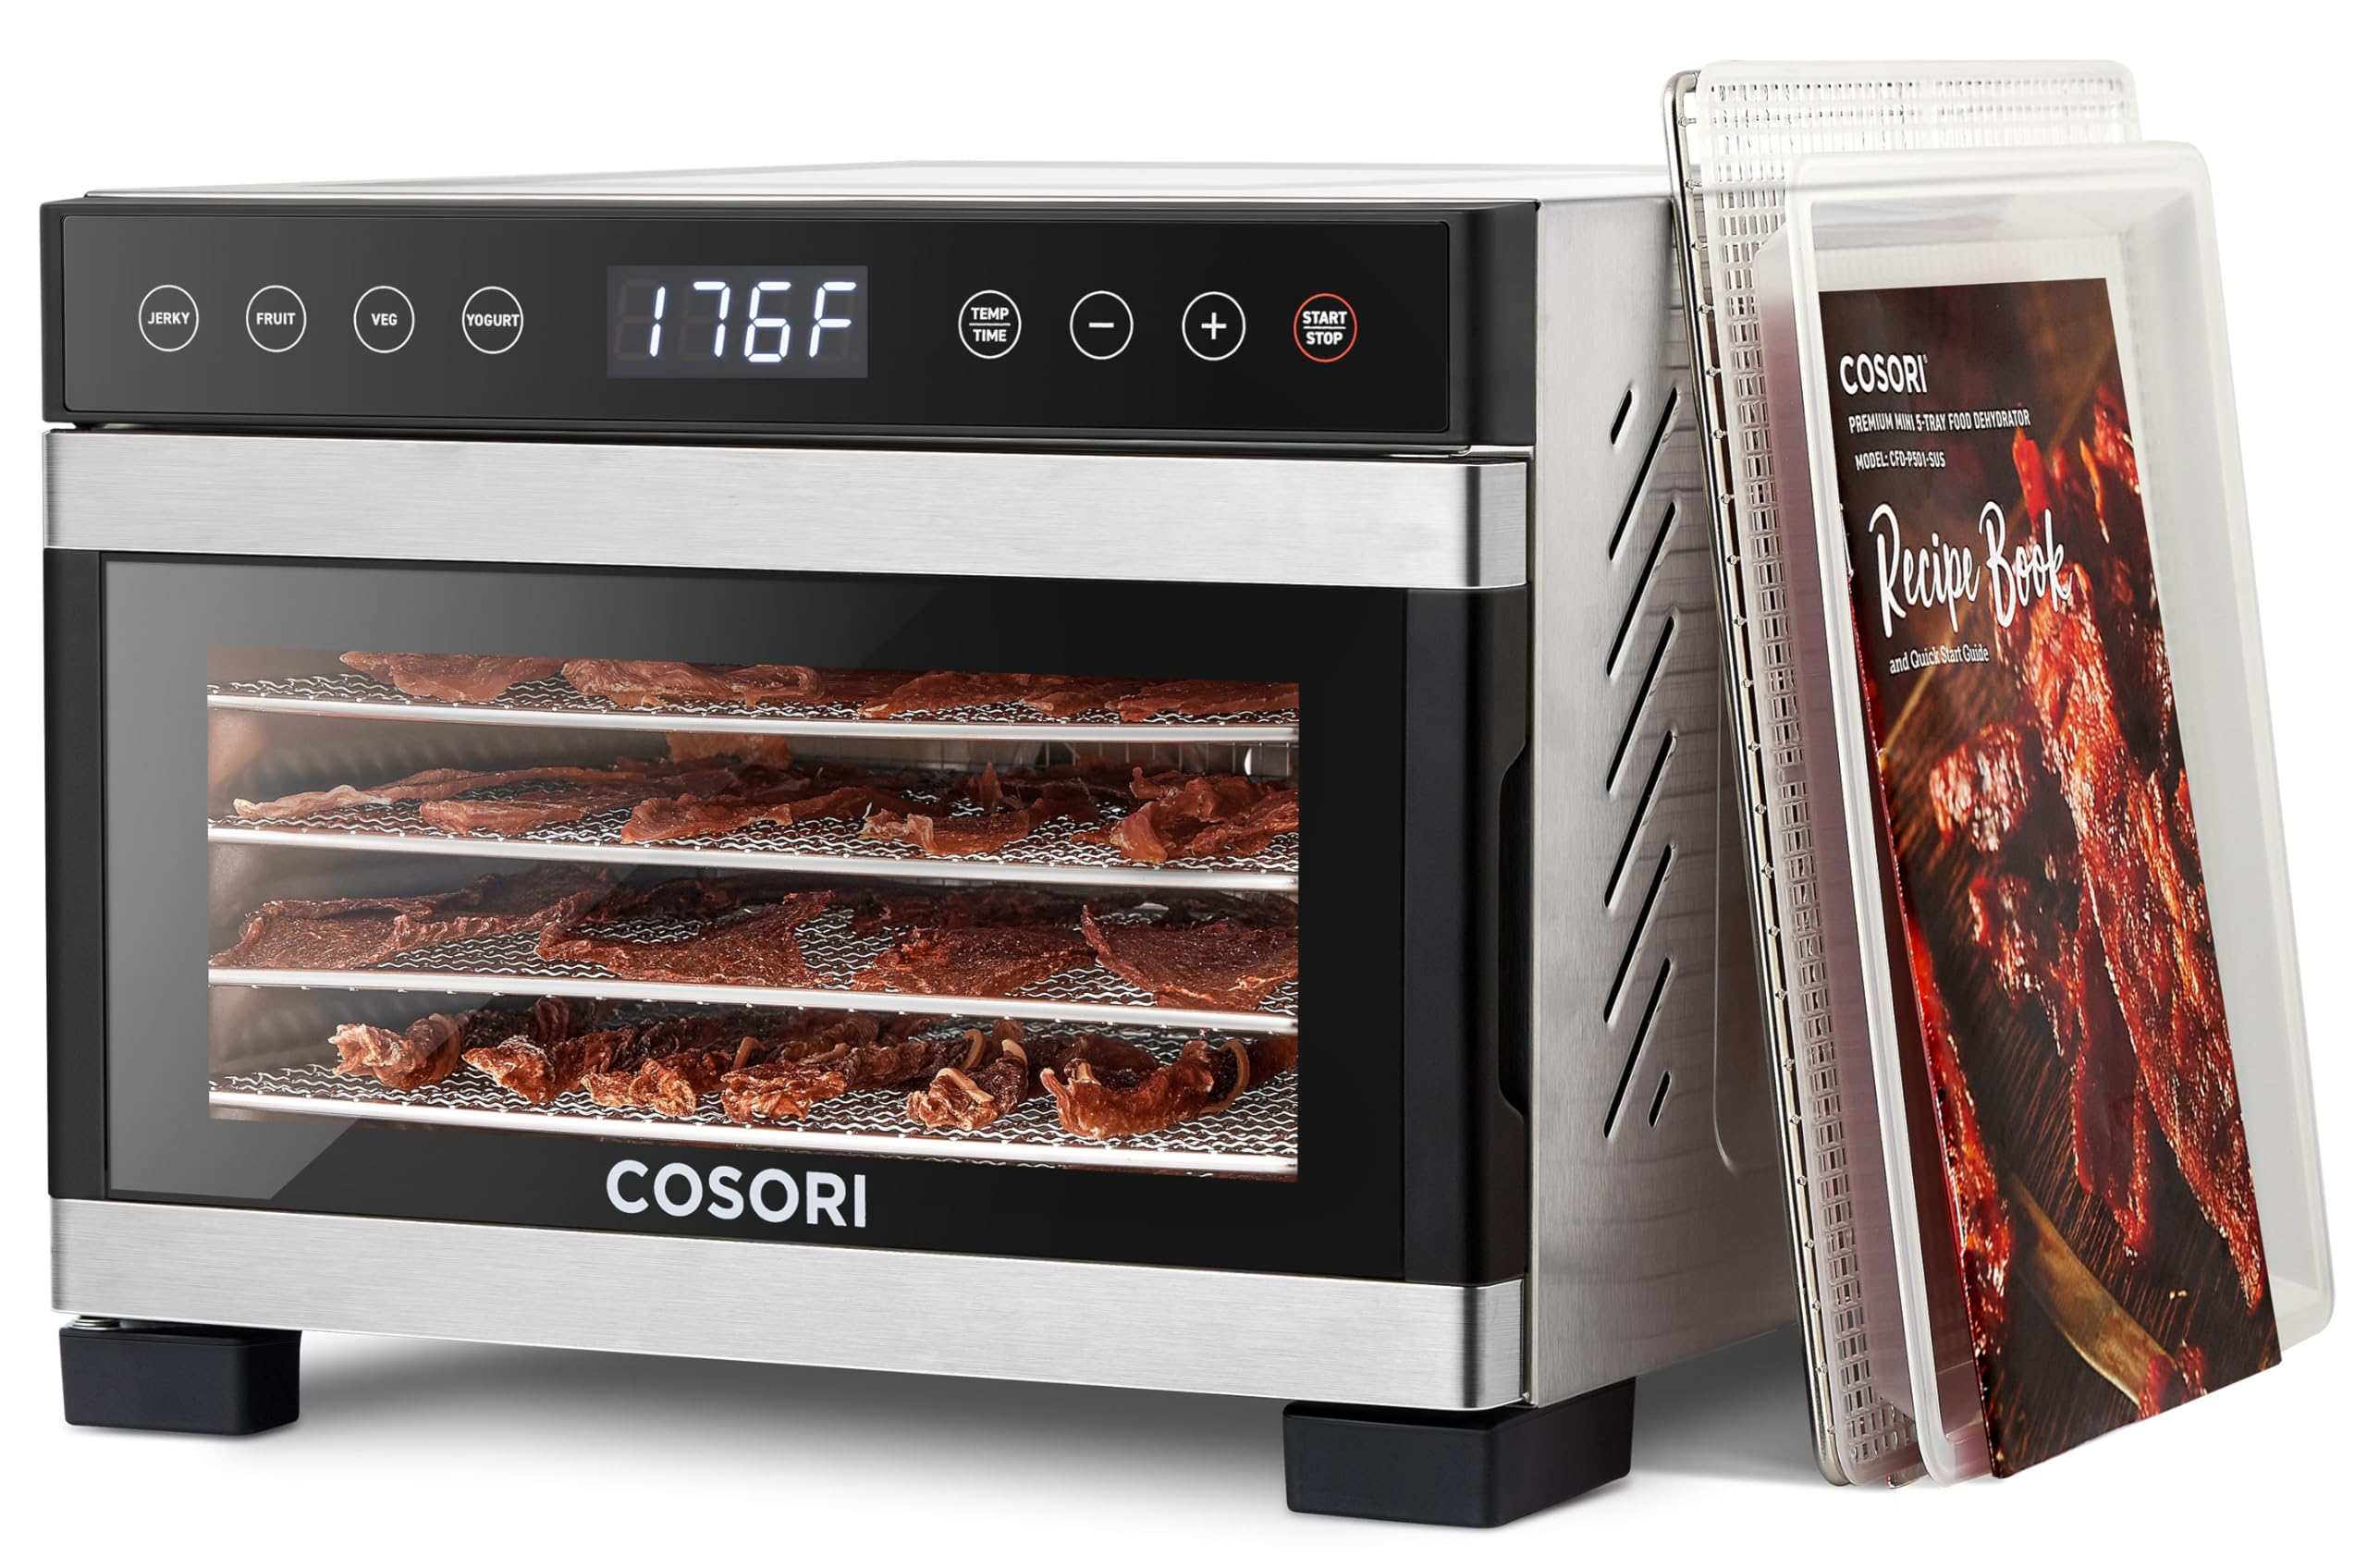 COSORI Food Dehydrator for Jerky, 176°F Temperature Control, 5 Stainless Steel Trays Dryer Machine, 4 Presets, 48H Timer, for Dog Treats, Meat, Fruit, Veggies, Snacks, Recipe Book Included